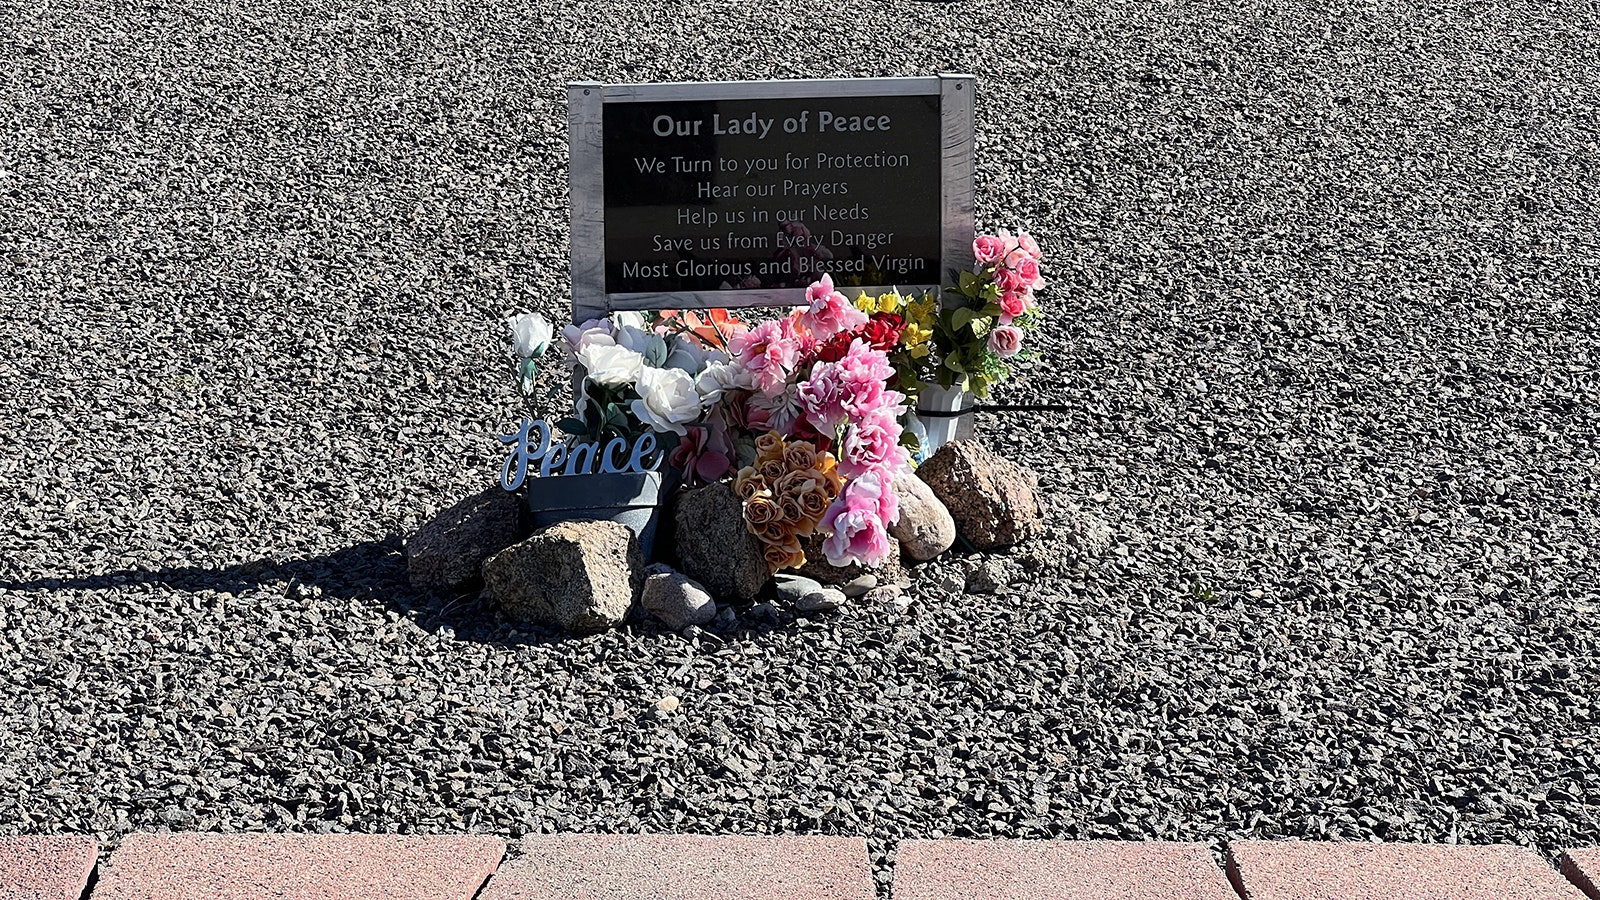 Fresh flowers are almost always left at the base of the Our Lady of Peace shrine in Pine Bluffs, Wyoming.